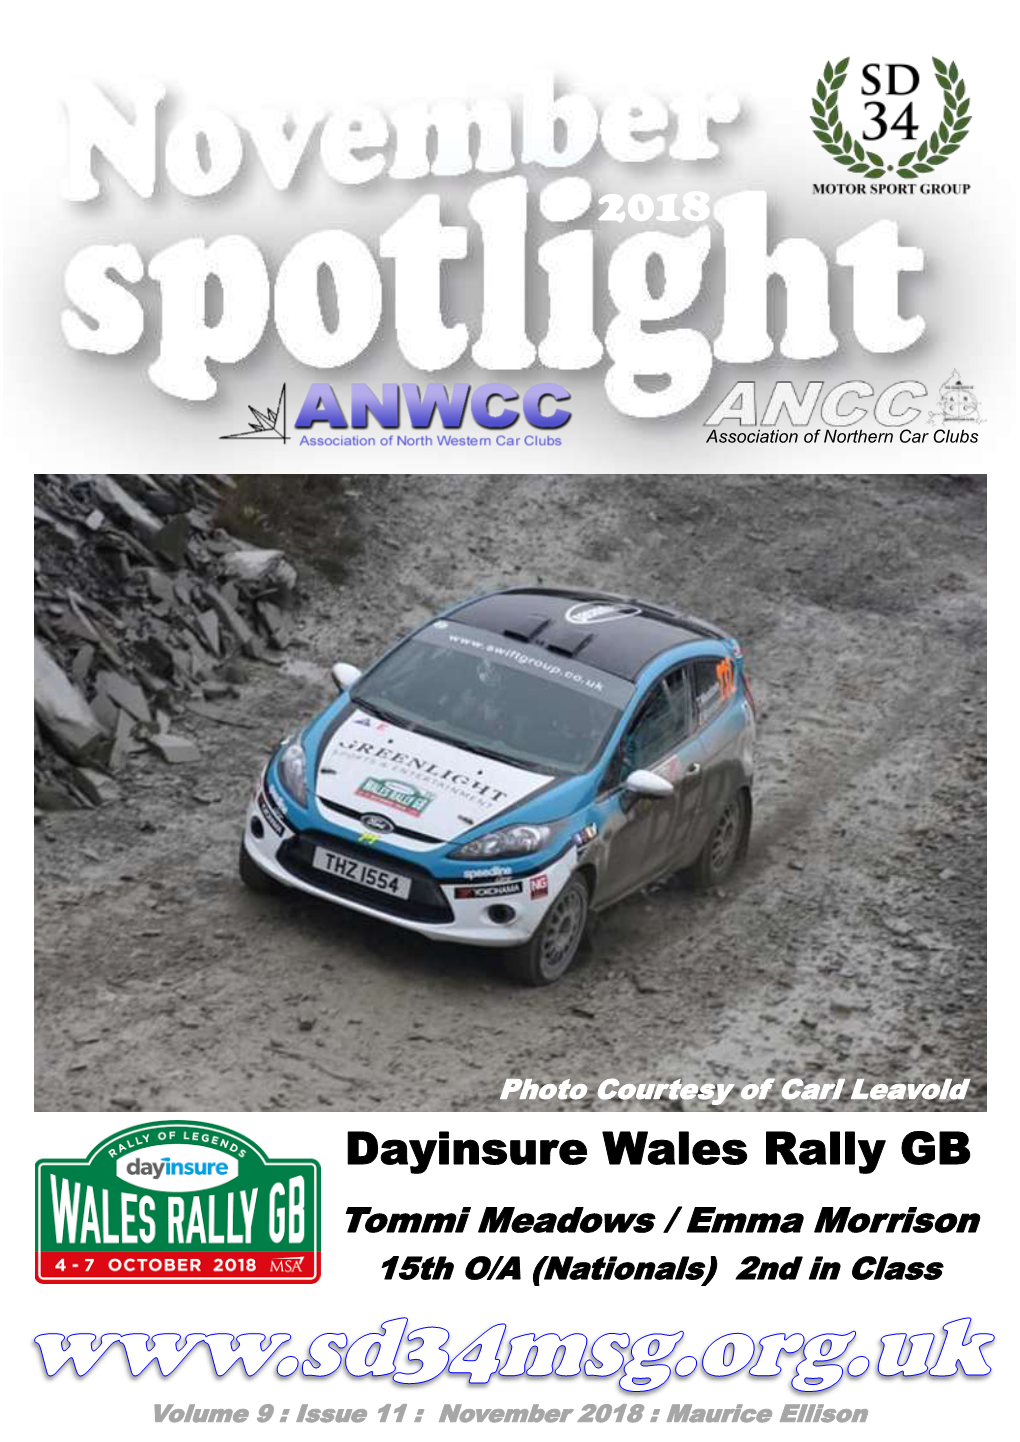 Dayinsure Wales Rally GB Tommi Meadows / Emma Morrison 15Th O/A (Nationals) 2Nd in Class